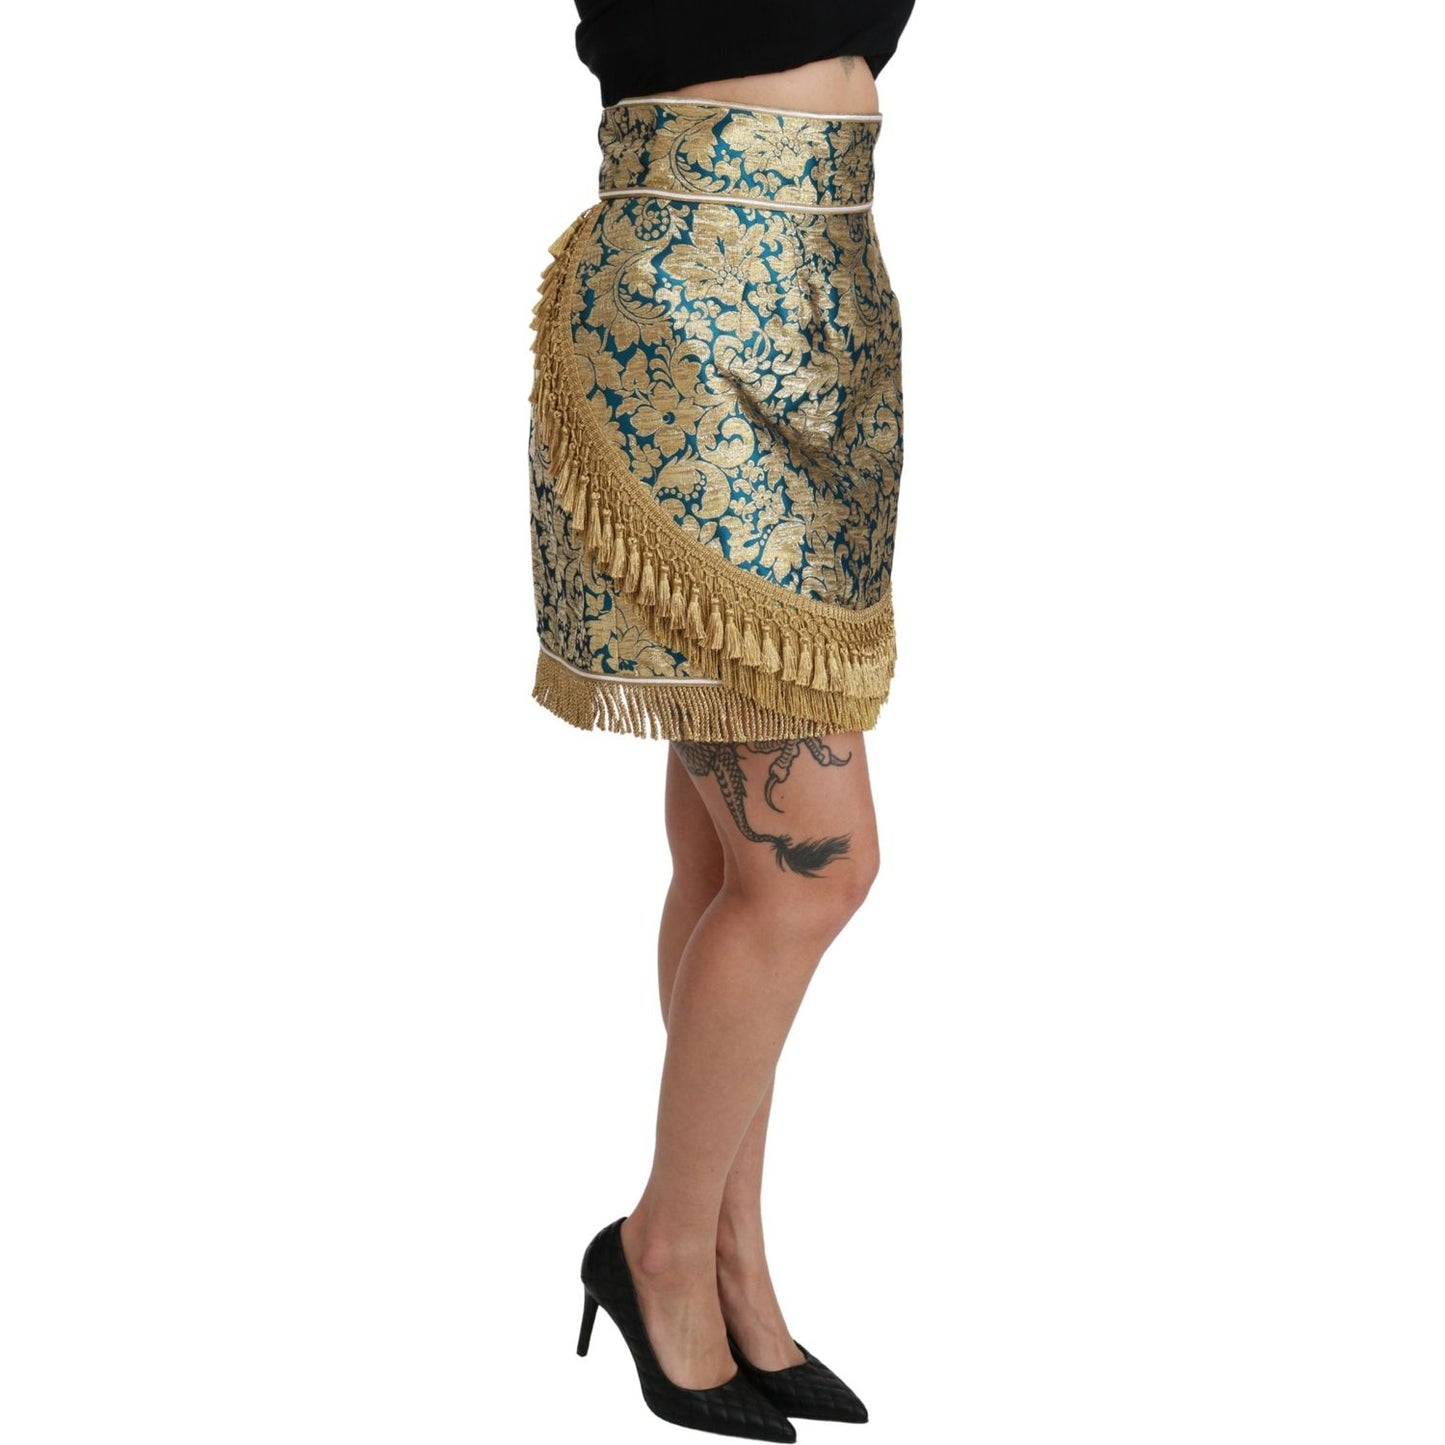 Dolce & Gabbana Elevate Your Wardrobe with Our Exquisite Gold Skirt blue-high-waist-jacquard-tassel-gold-skirt